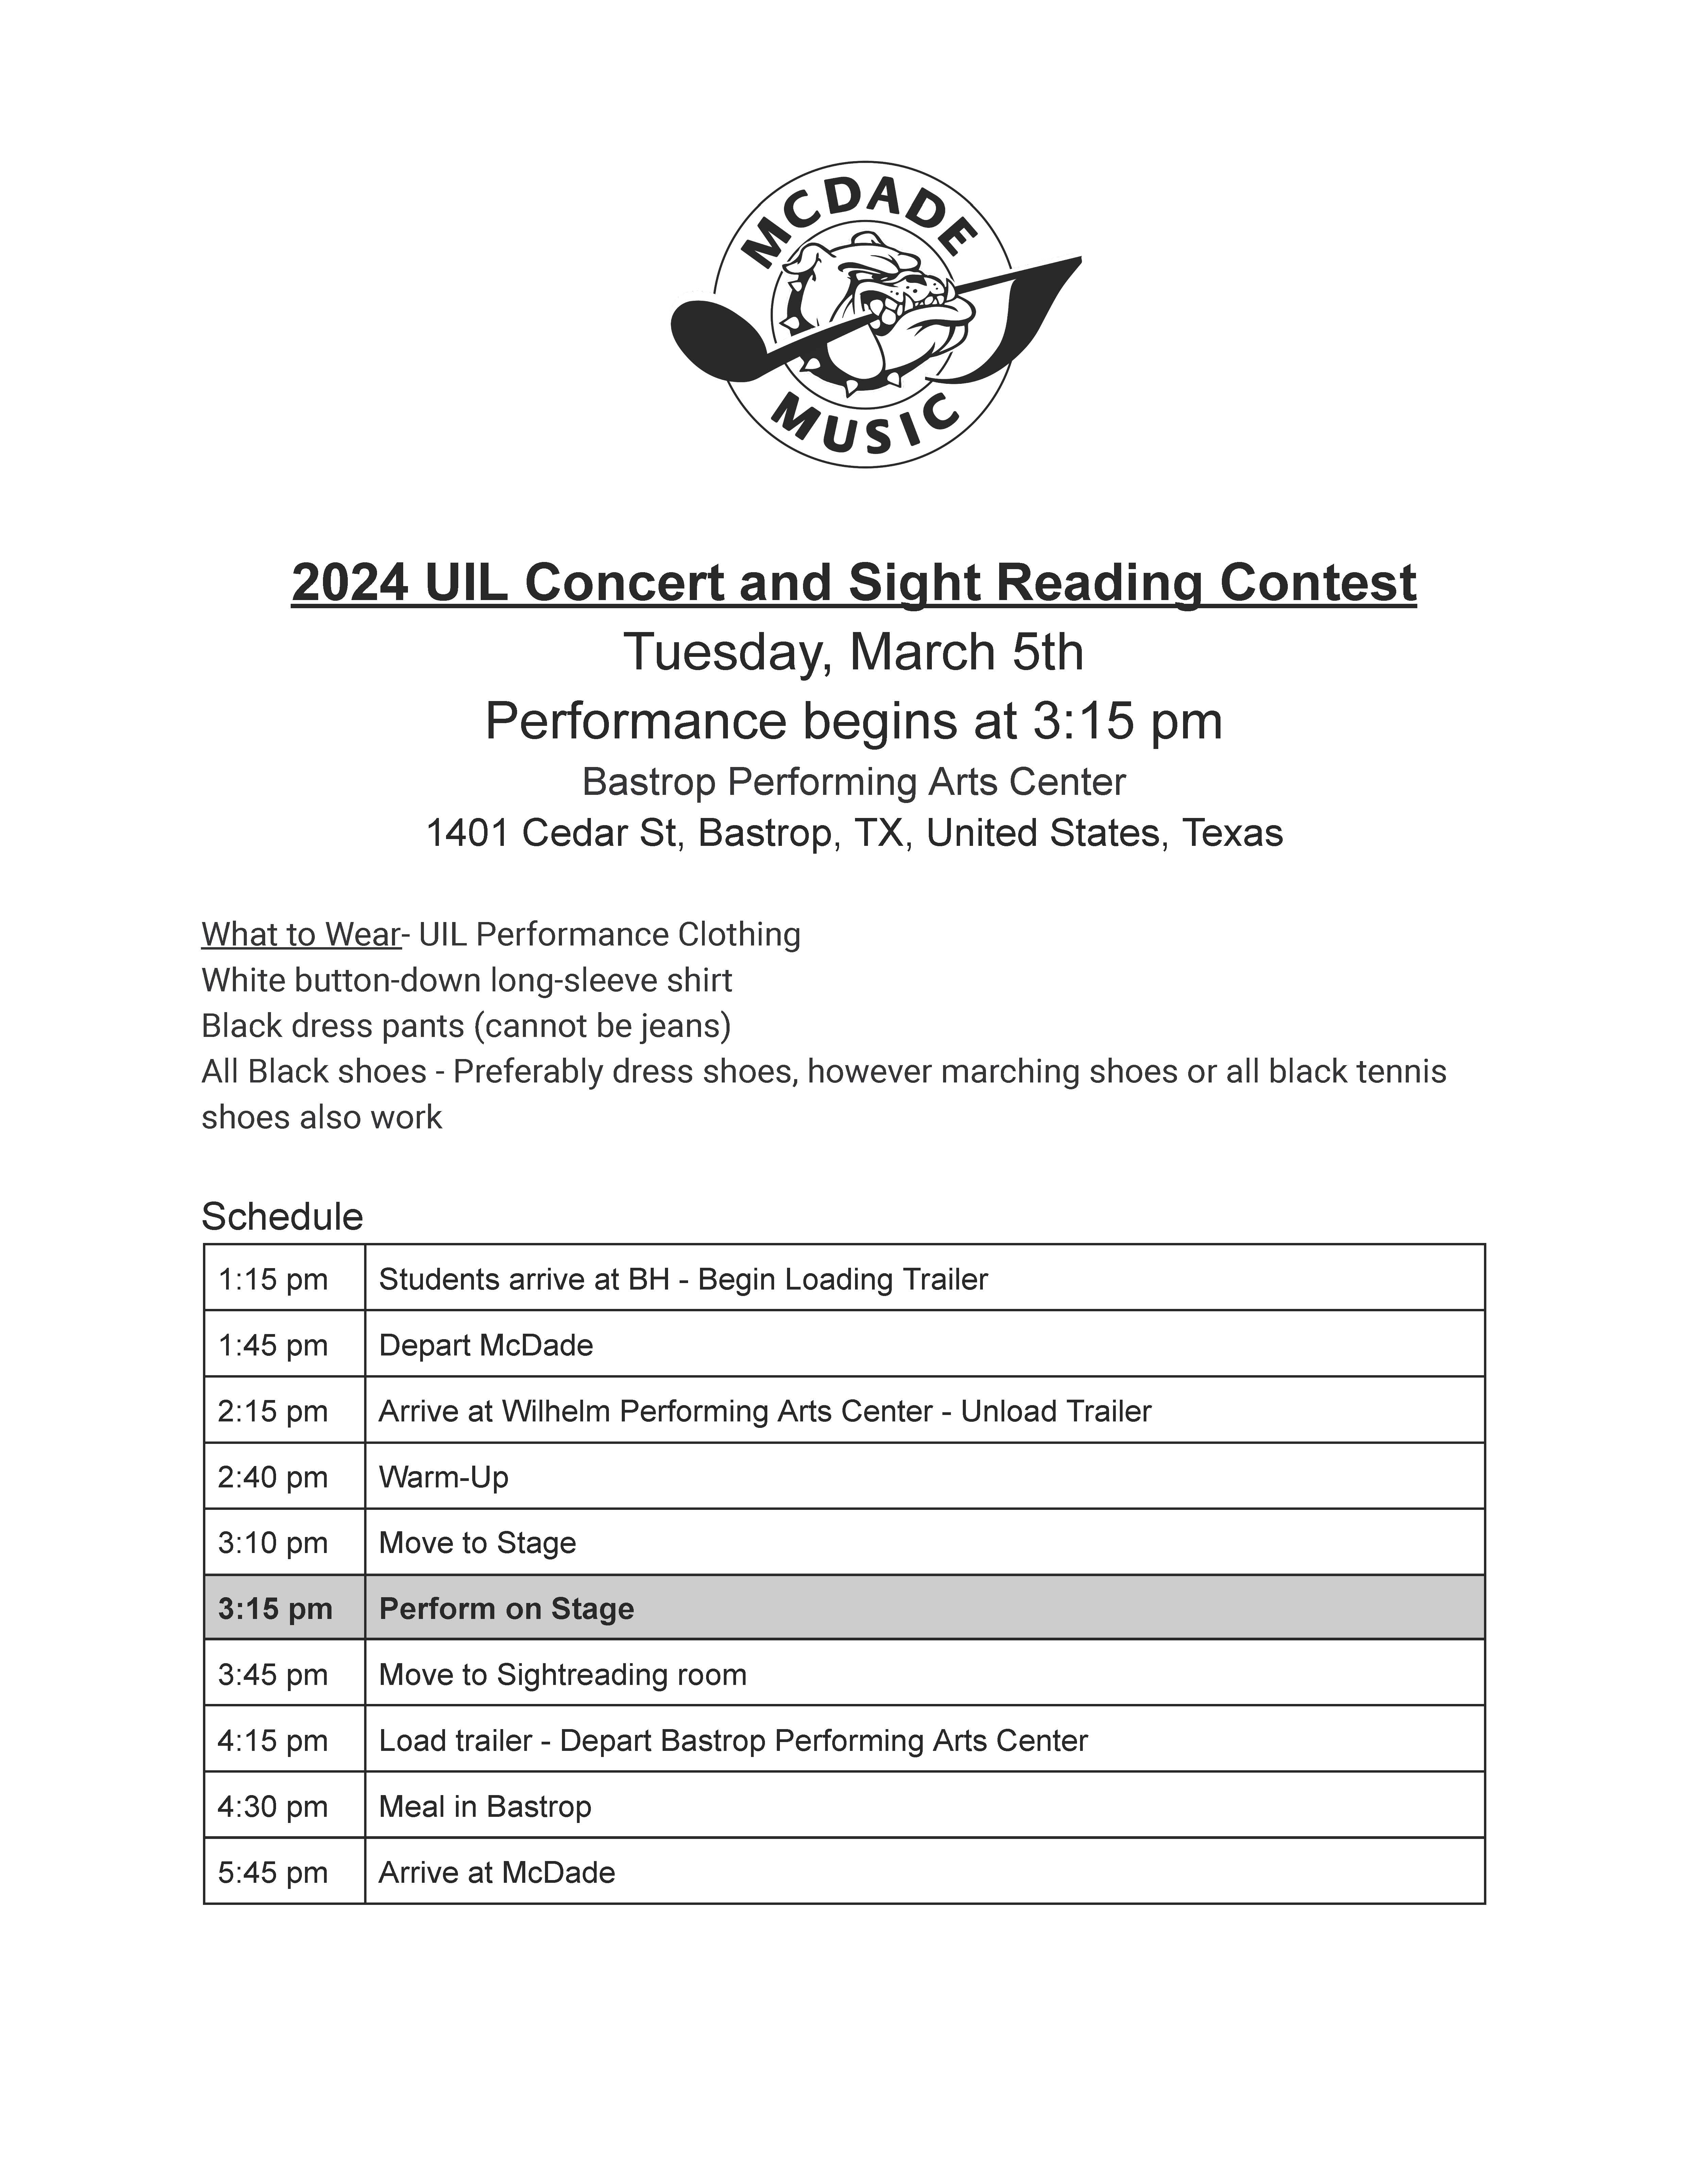 UIL Concert and Sightreading Schedule